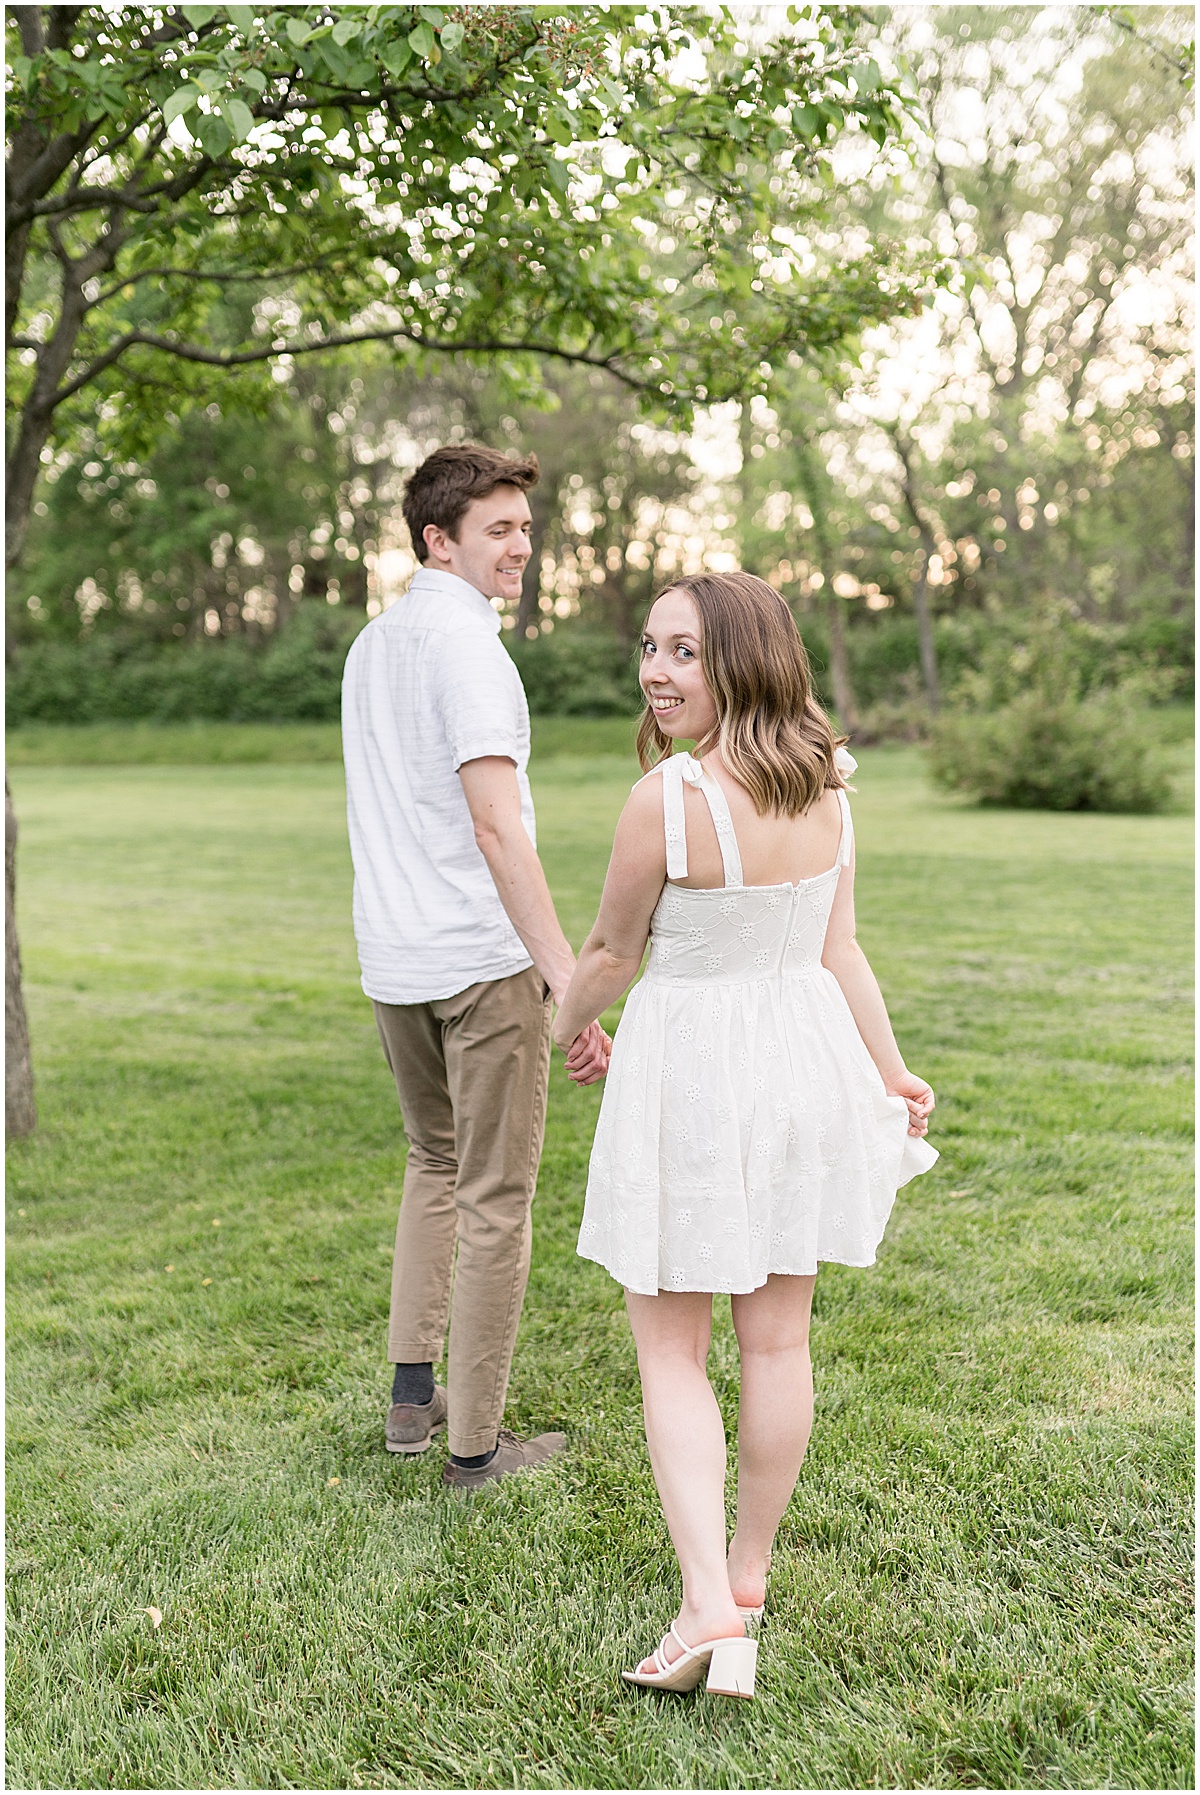 Couple in white during engagement photos at Holcomb Gardens in Indianapolis.